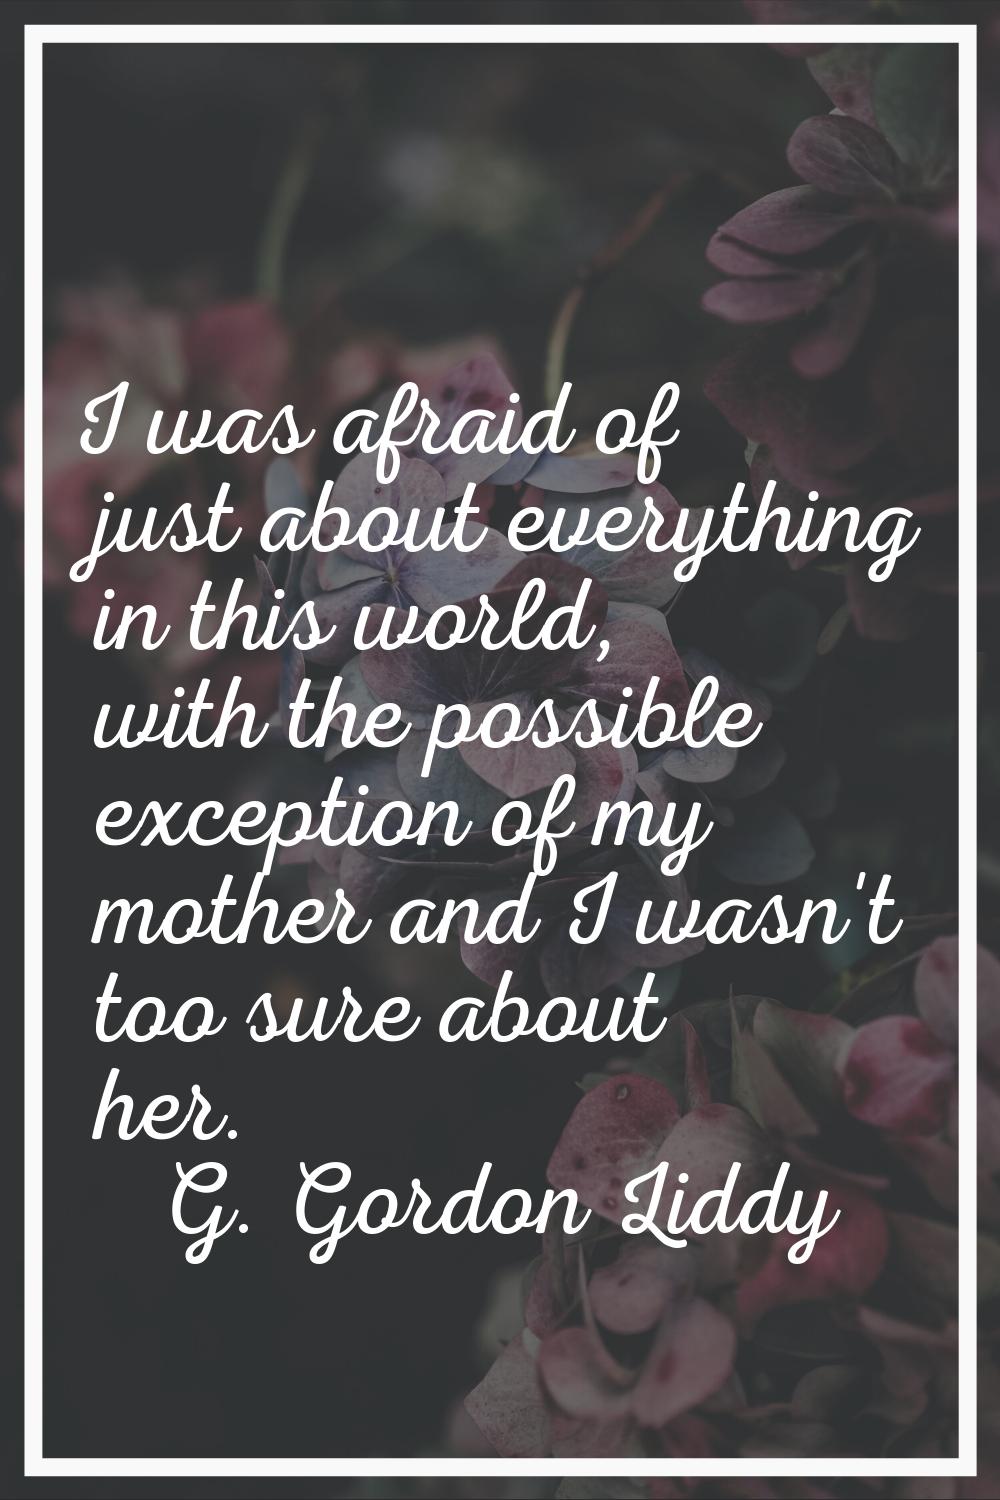 I was afraid of just about everything in this world, with the possible exception of my mother and I